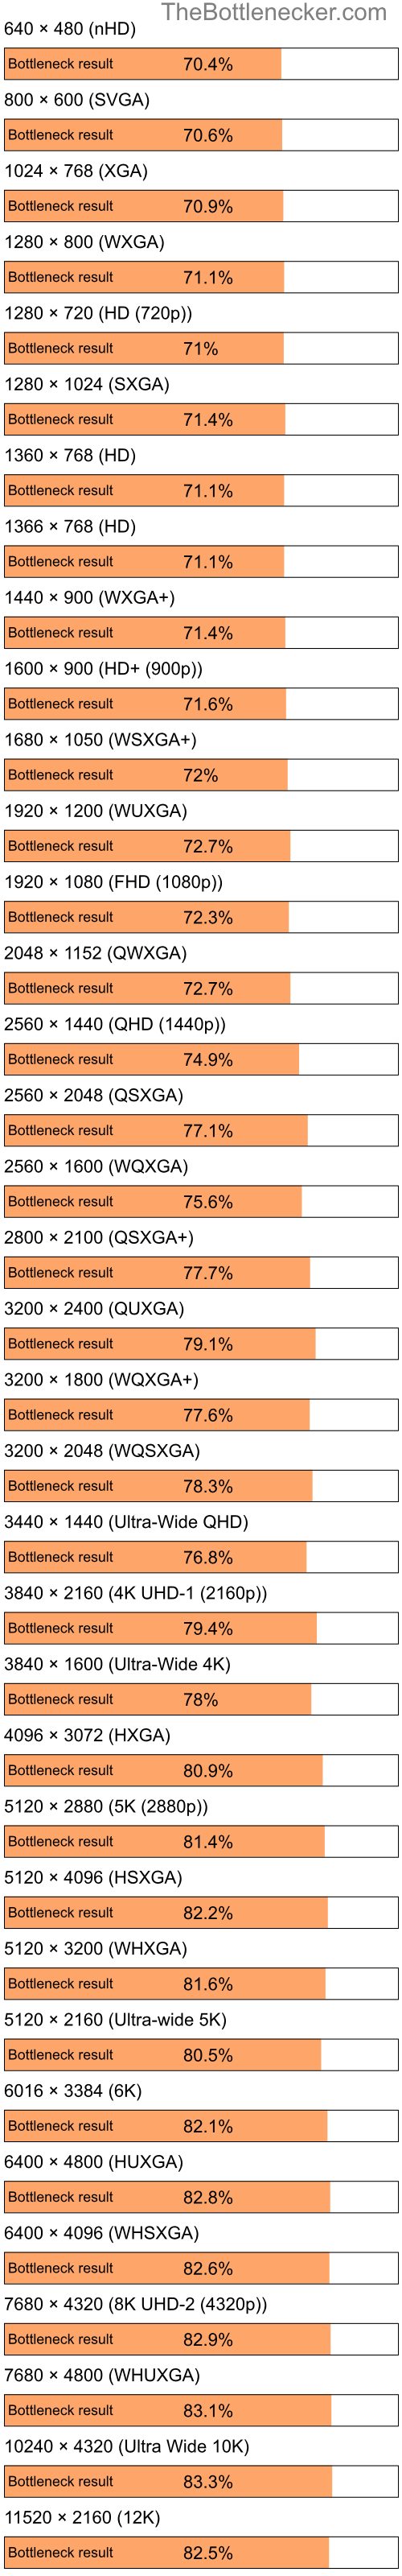 Bottleneck results by resolution for Intel Celeron M 410 and NVIDIA GeForce 9300M GS in Graphic Card Intense Tasks